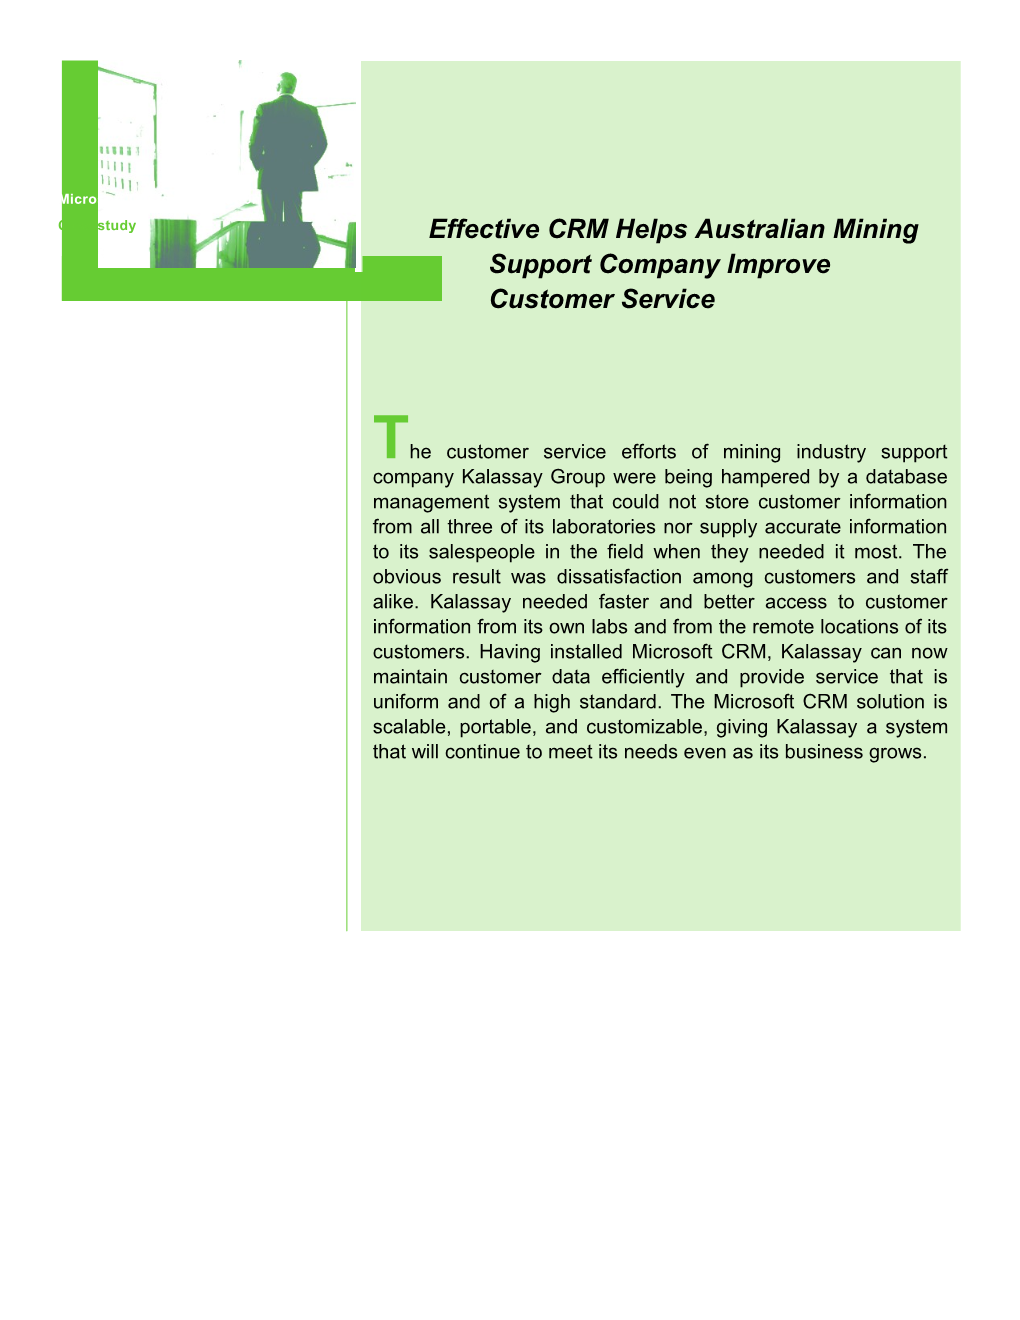 Effective CRM Helps Australian Mining Support Company Improve Customer Service